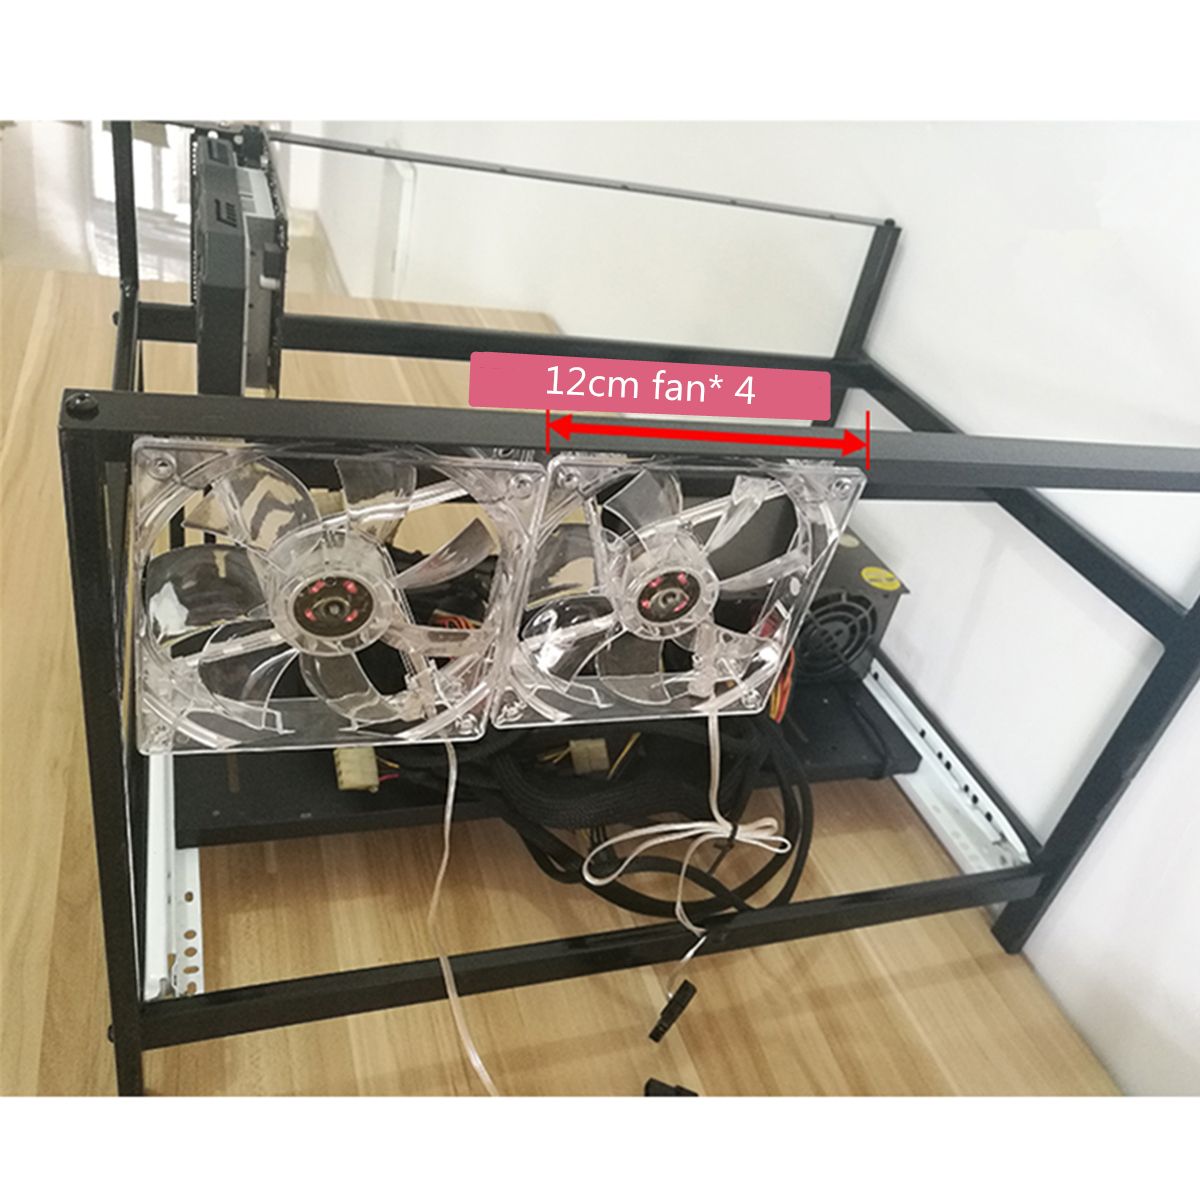 Big-Coin-Open-Air-Mining-Miner-Steal-Frame-Rig-Case-up-to-6-GPU-ETH-BTC-Ethereum-1245595